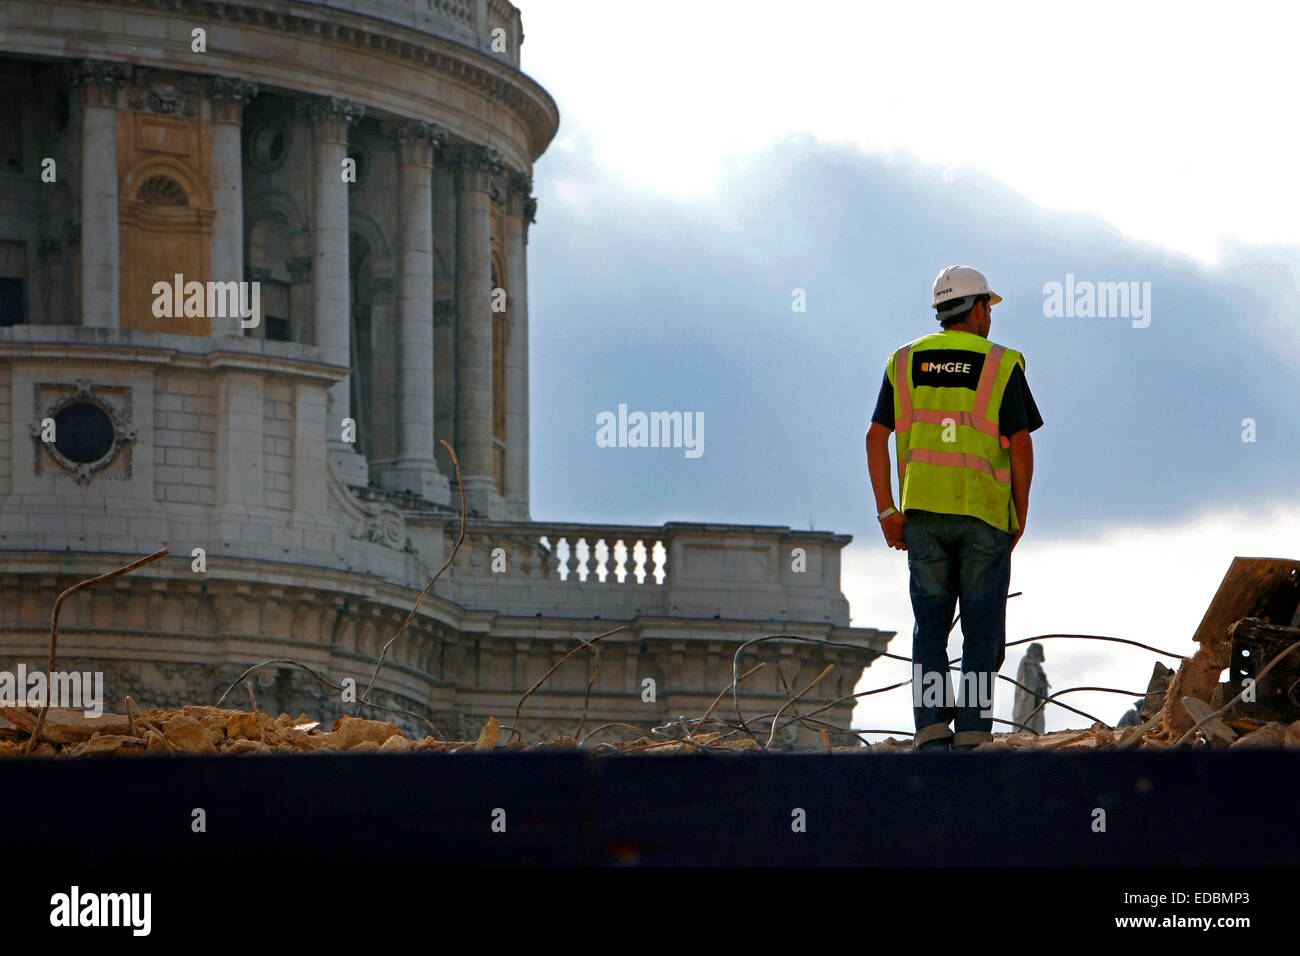 Mc Gee Builders work in the City, with the View of St Pauls Cathederal Stock Photo